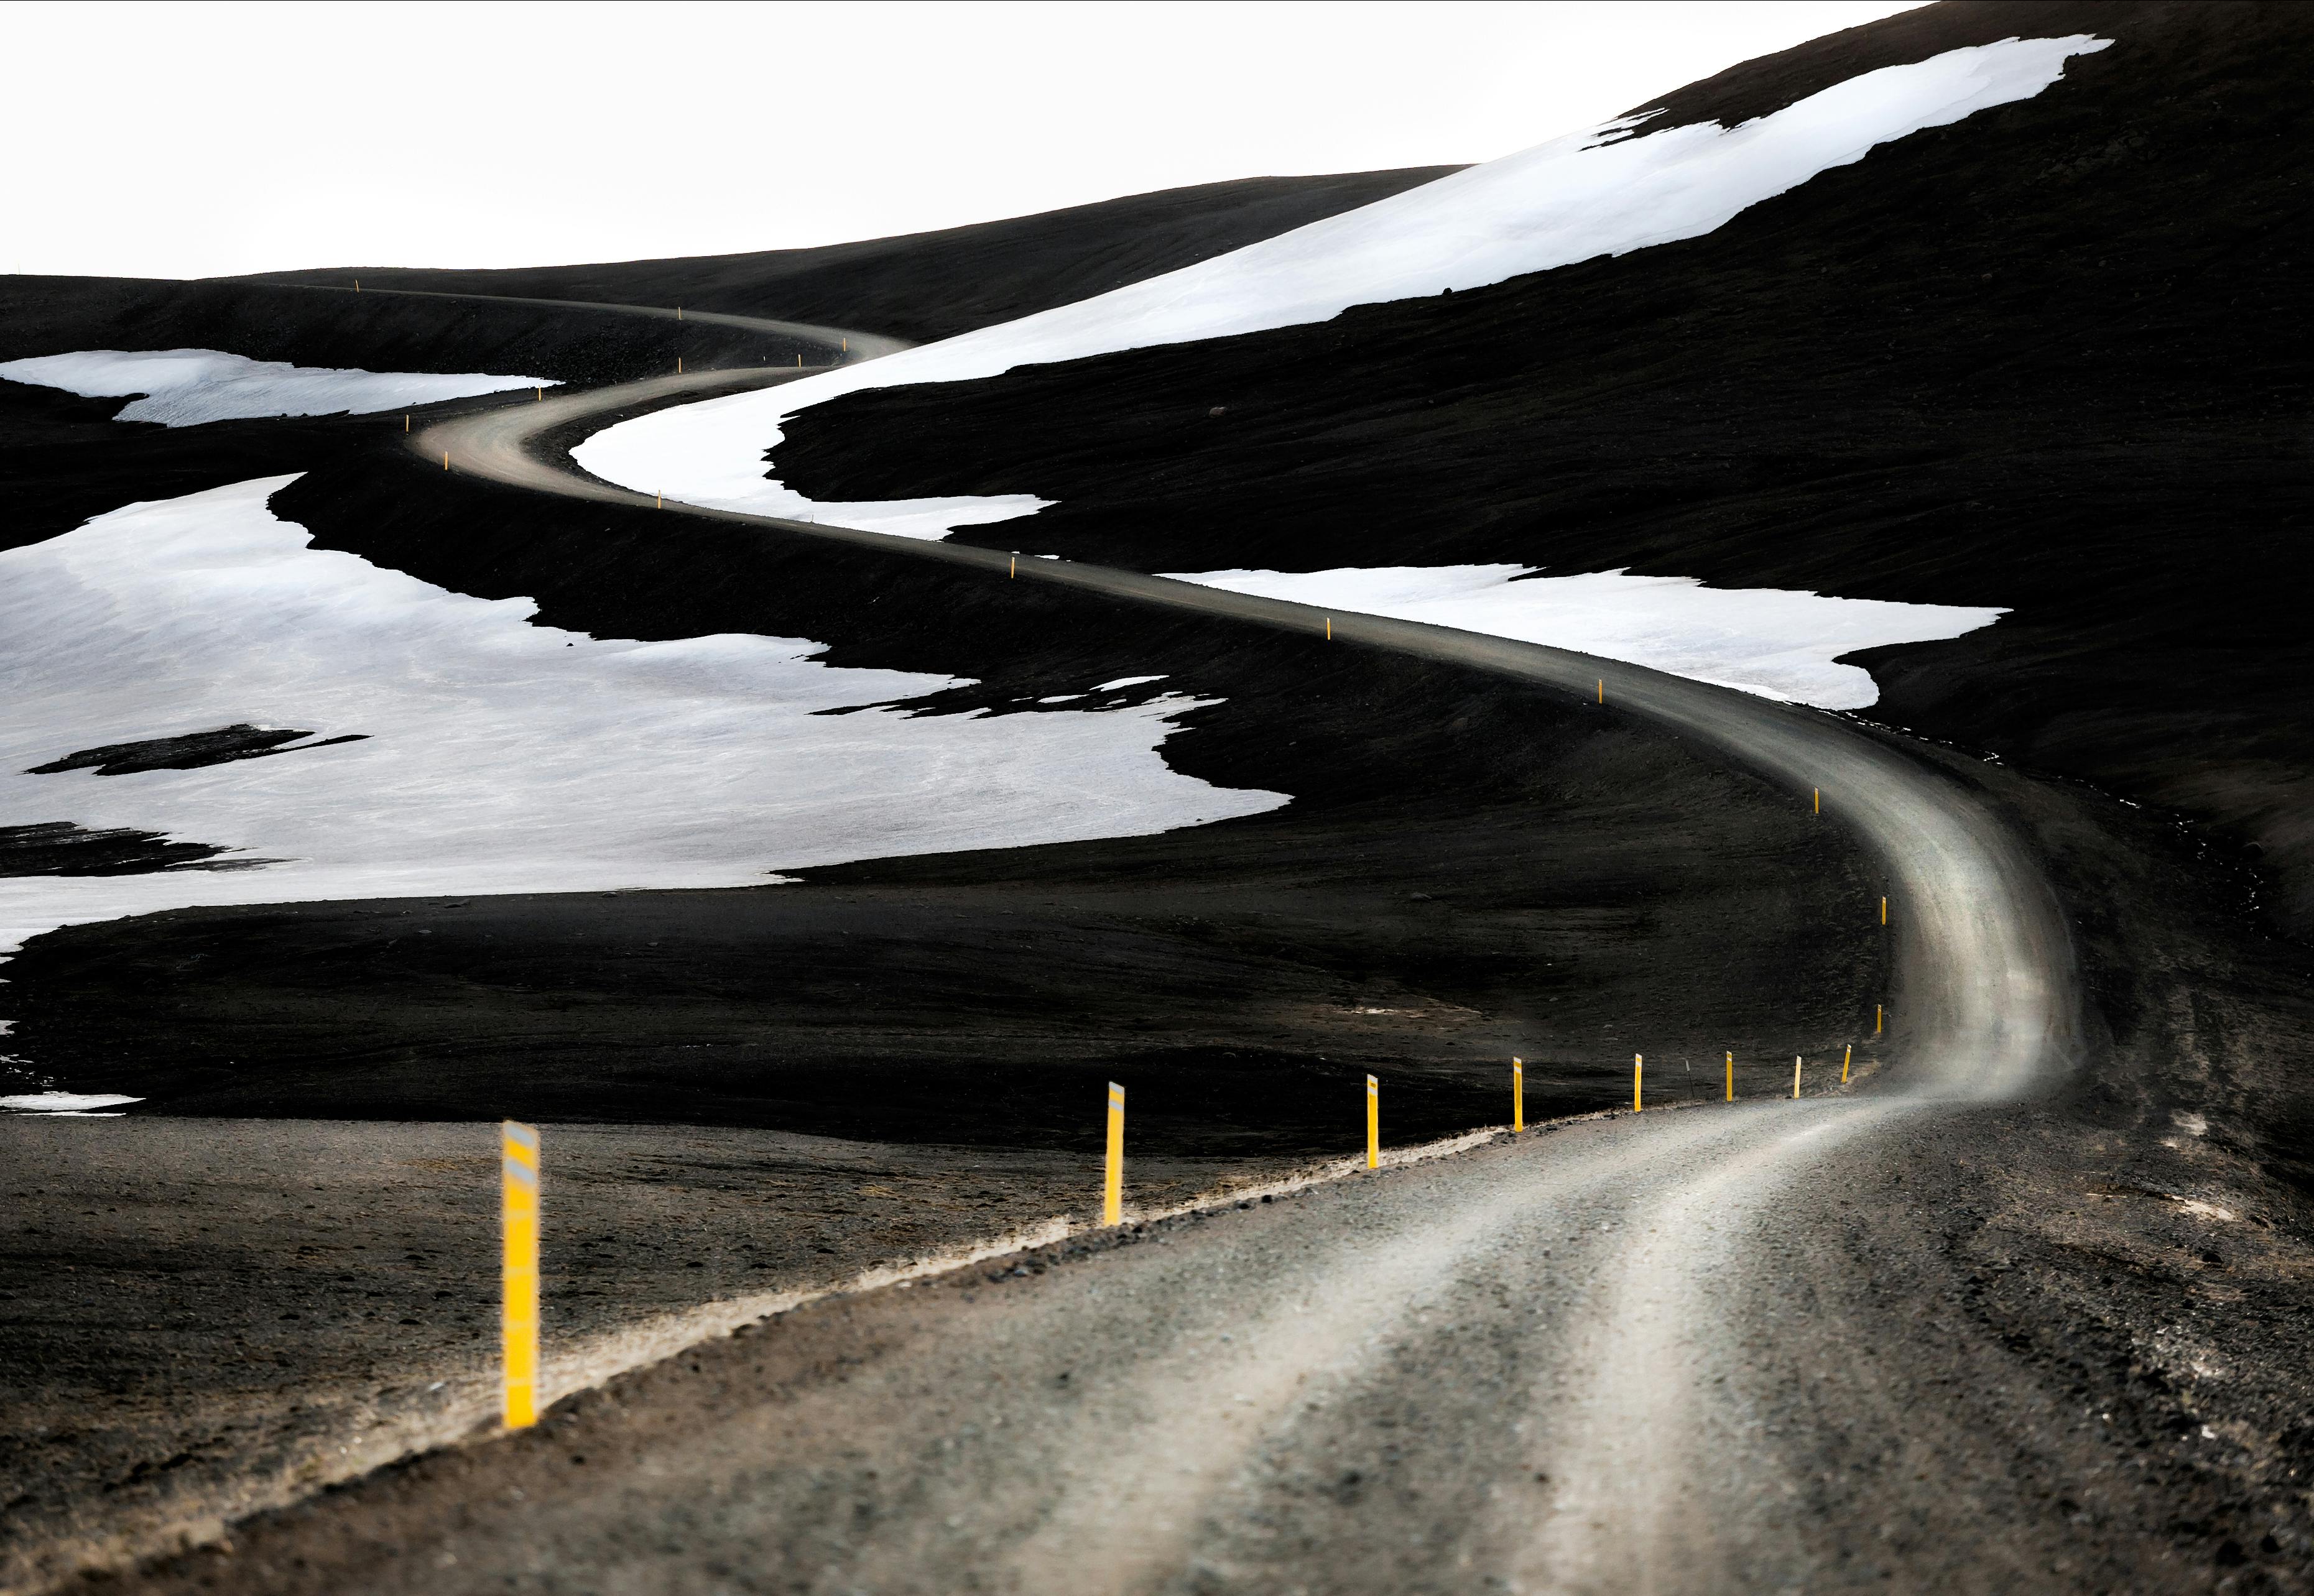 Winter road through black sand, surrounded by snow-covered mountains and rugged landscape.